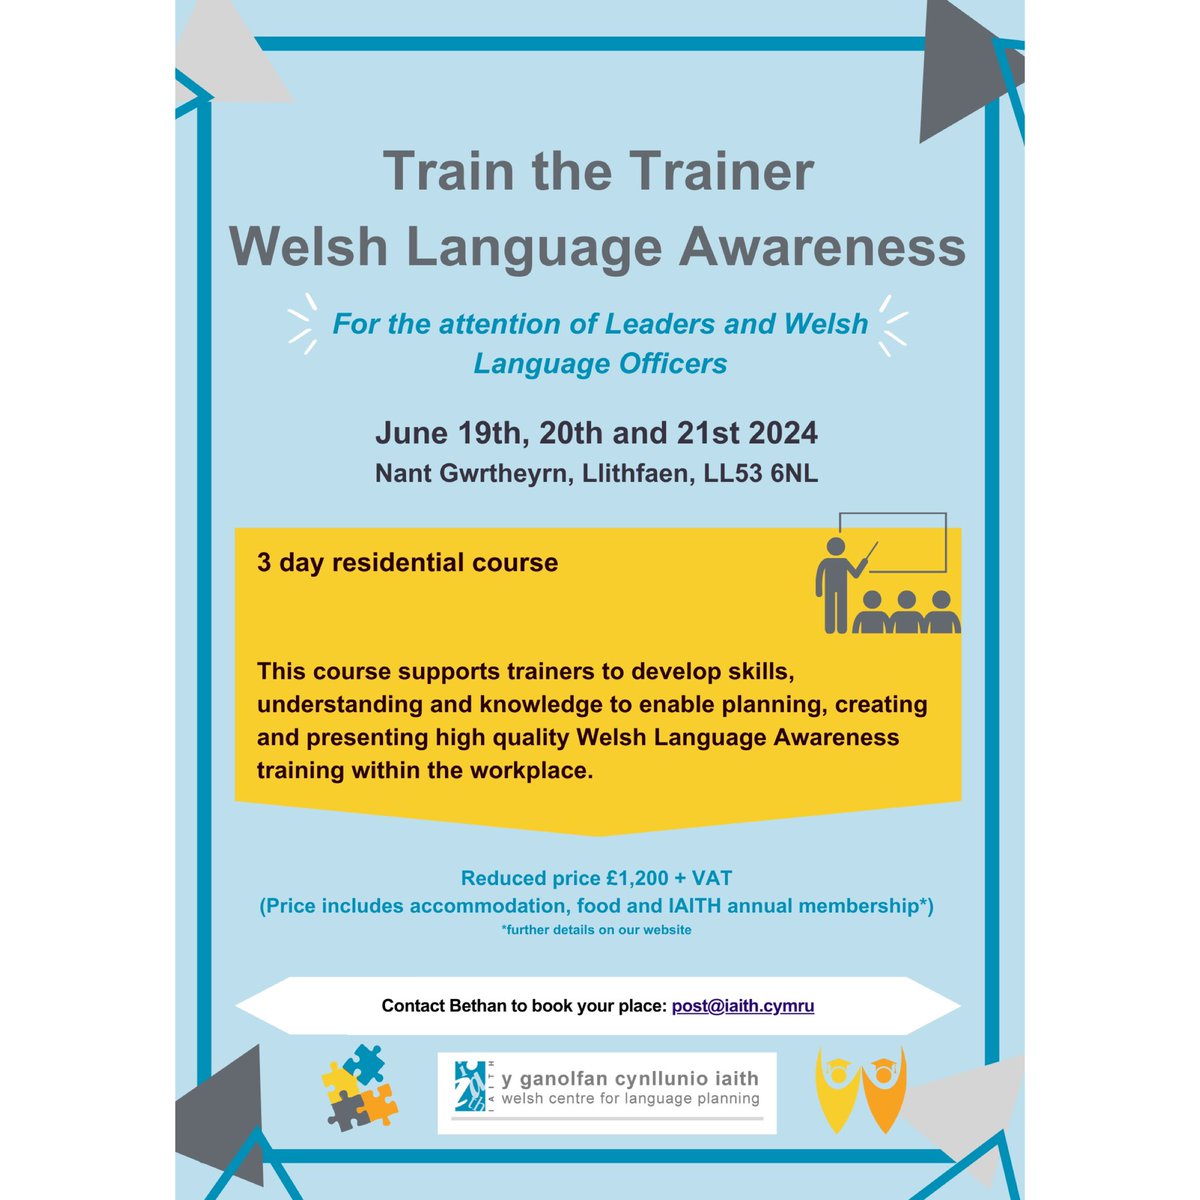 Train the Trainer Welsh Language Awareness *For the attention of Leaders and Welsh Language Officers* June 19th, 20th and 21st 2024 Nant Gwrtheyrn, Llithfaen, LL53 6NL 3 day residential course Contact Bethan to book your place: post@iaith.cymru